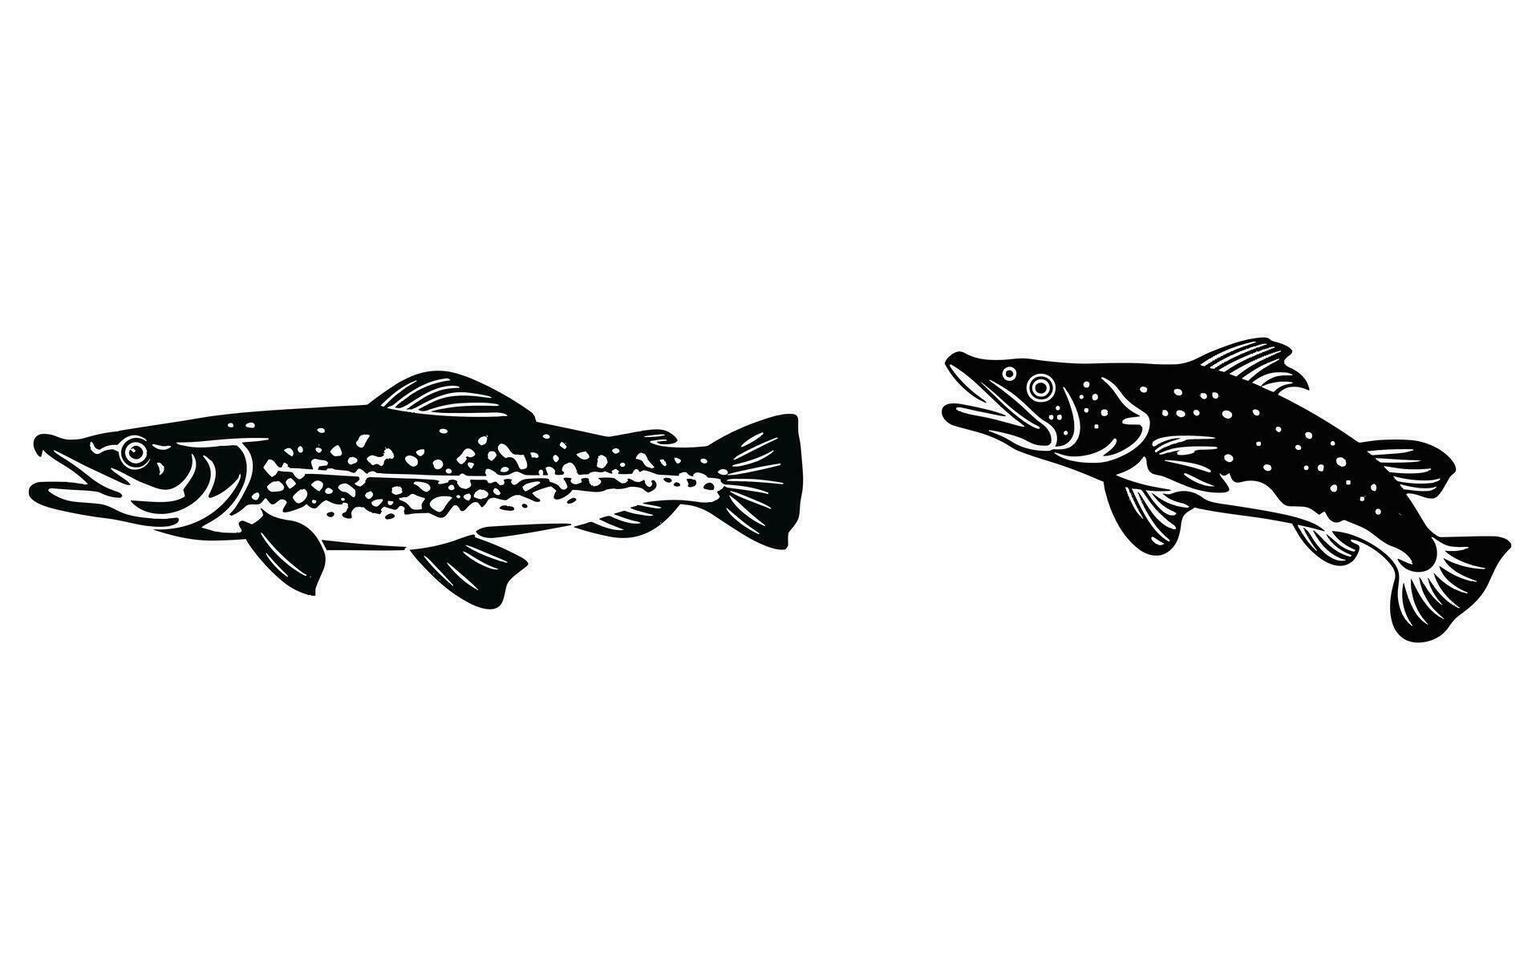 River Pike Fish illustration ,Pike Fishing Logo, Unique and Fresh Pike fish jumping out of the water, vector